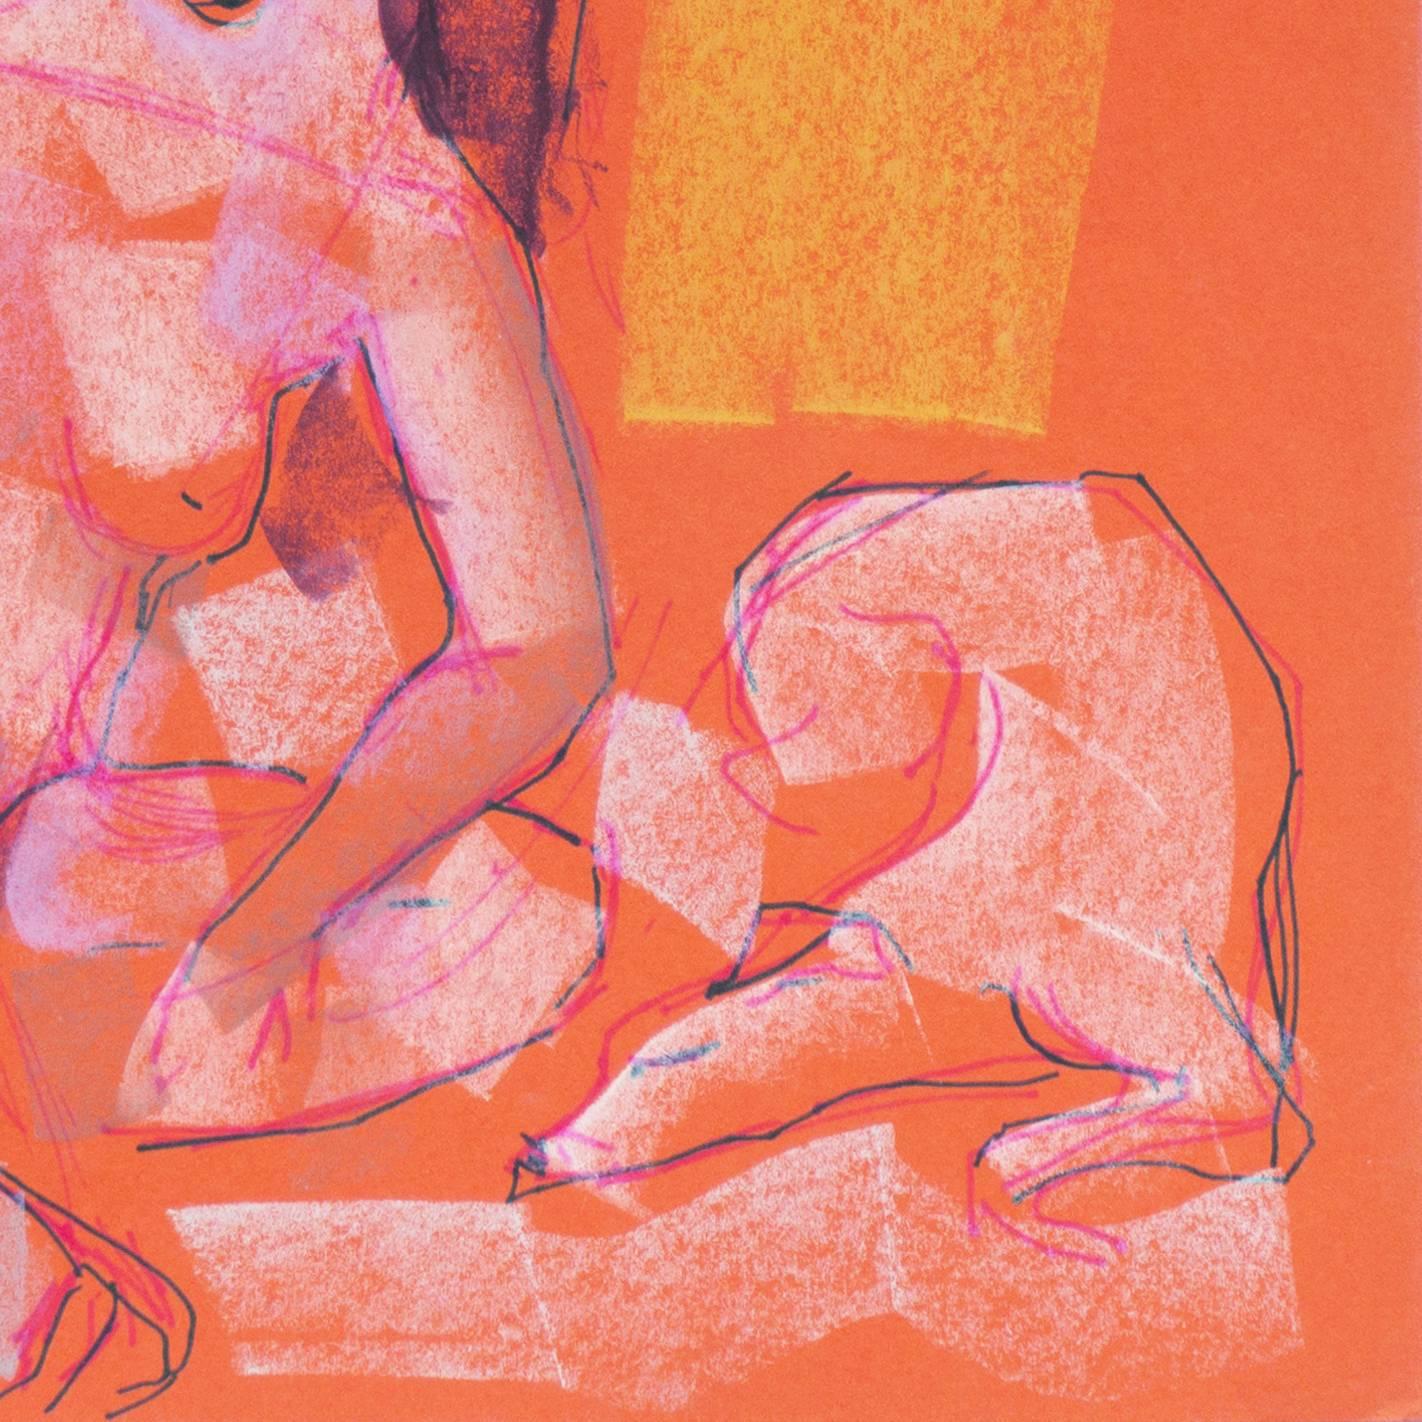 Diana Seated - Orange Figurative Art by Virginia Sevier Rogers